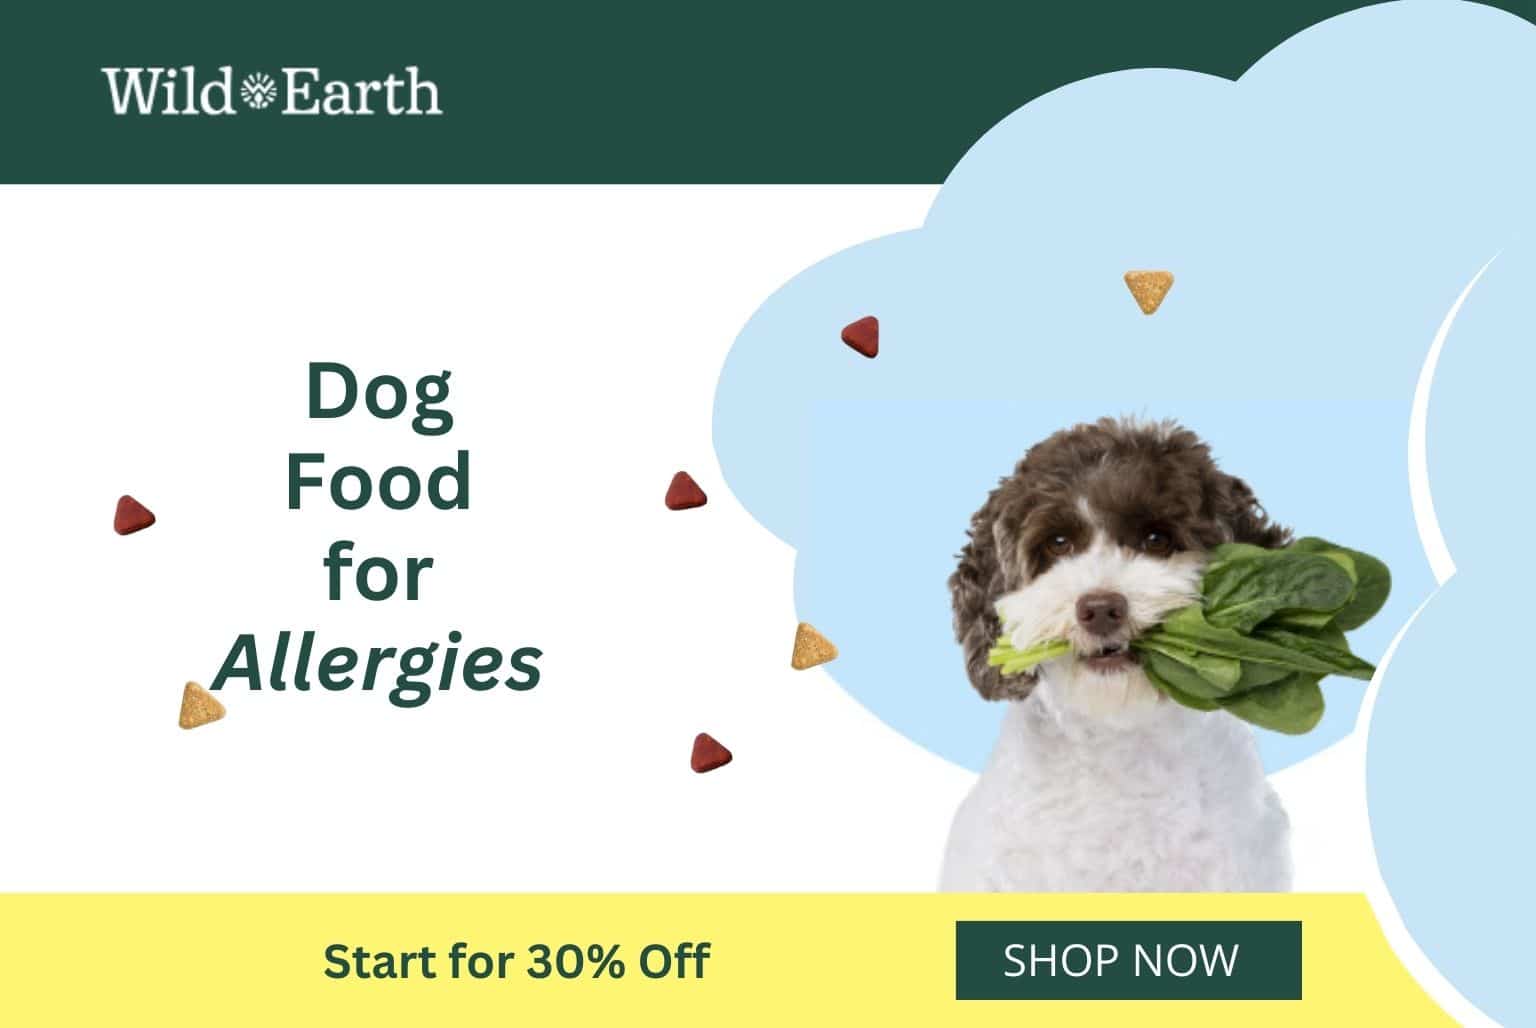 Click here to get Wild Earth plant-based food and supplements for your dog